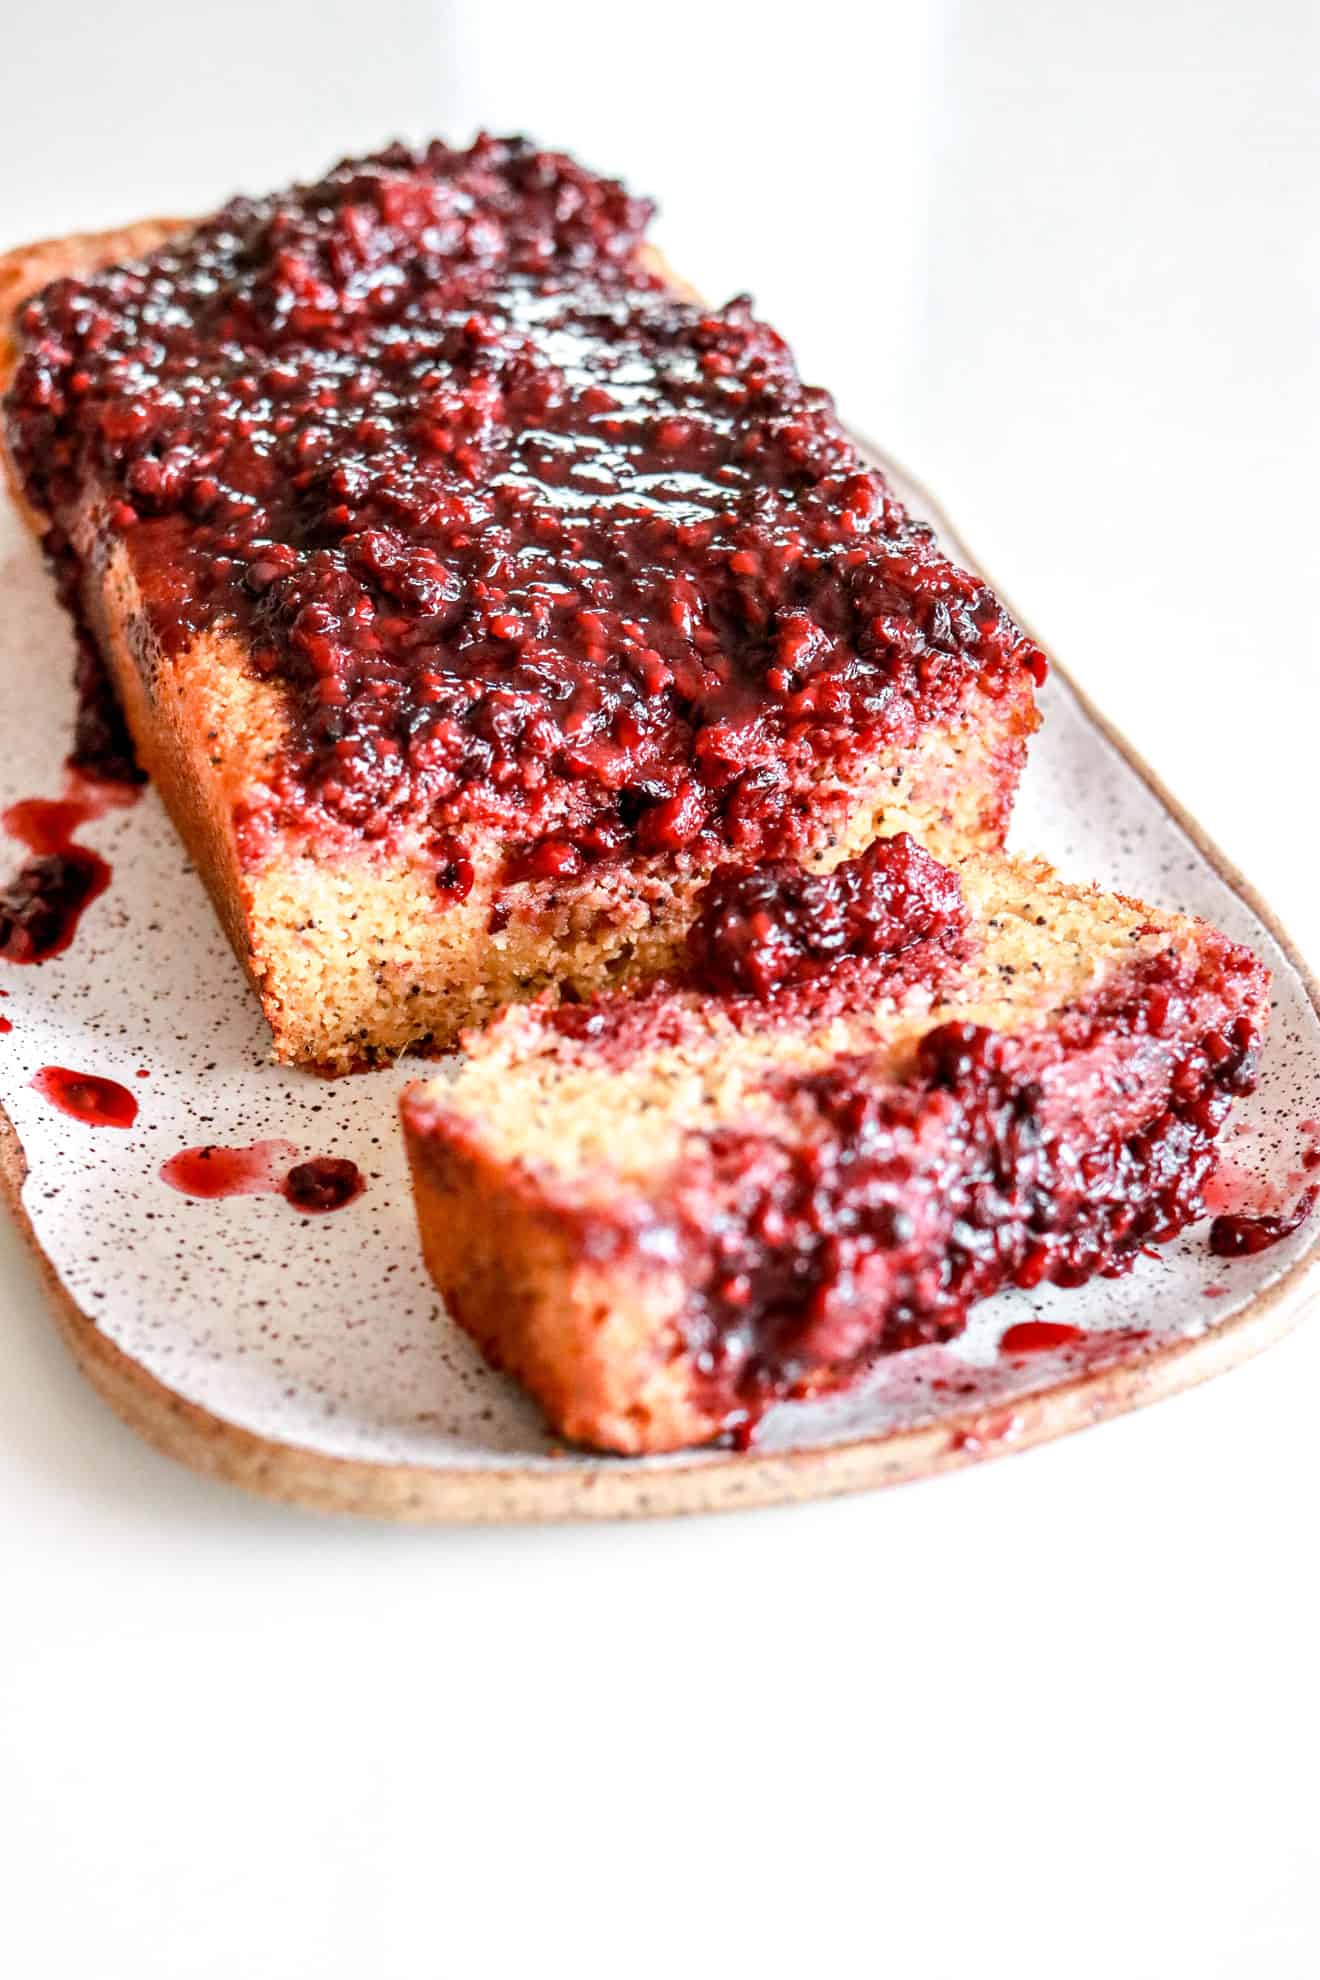 lemon poppy seed bread with blackberry glaze on top on a plate on a white counter